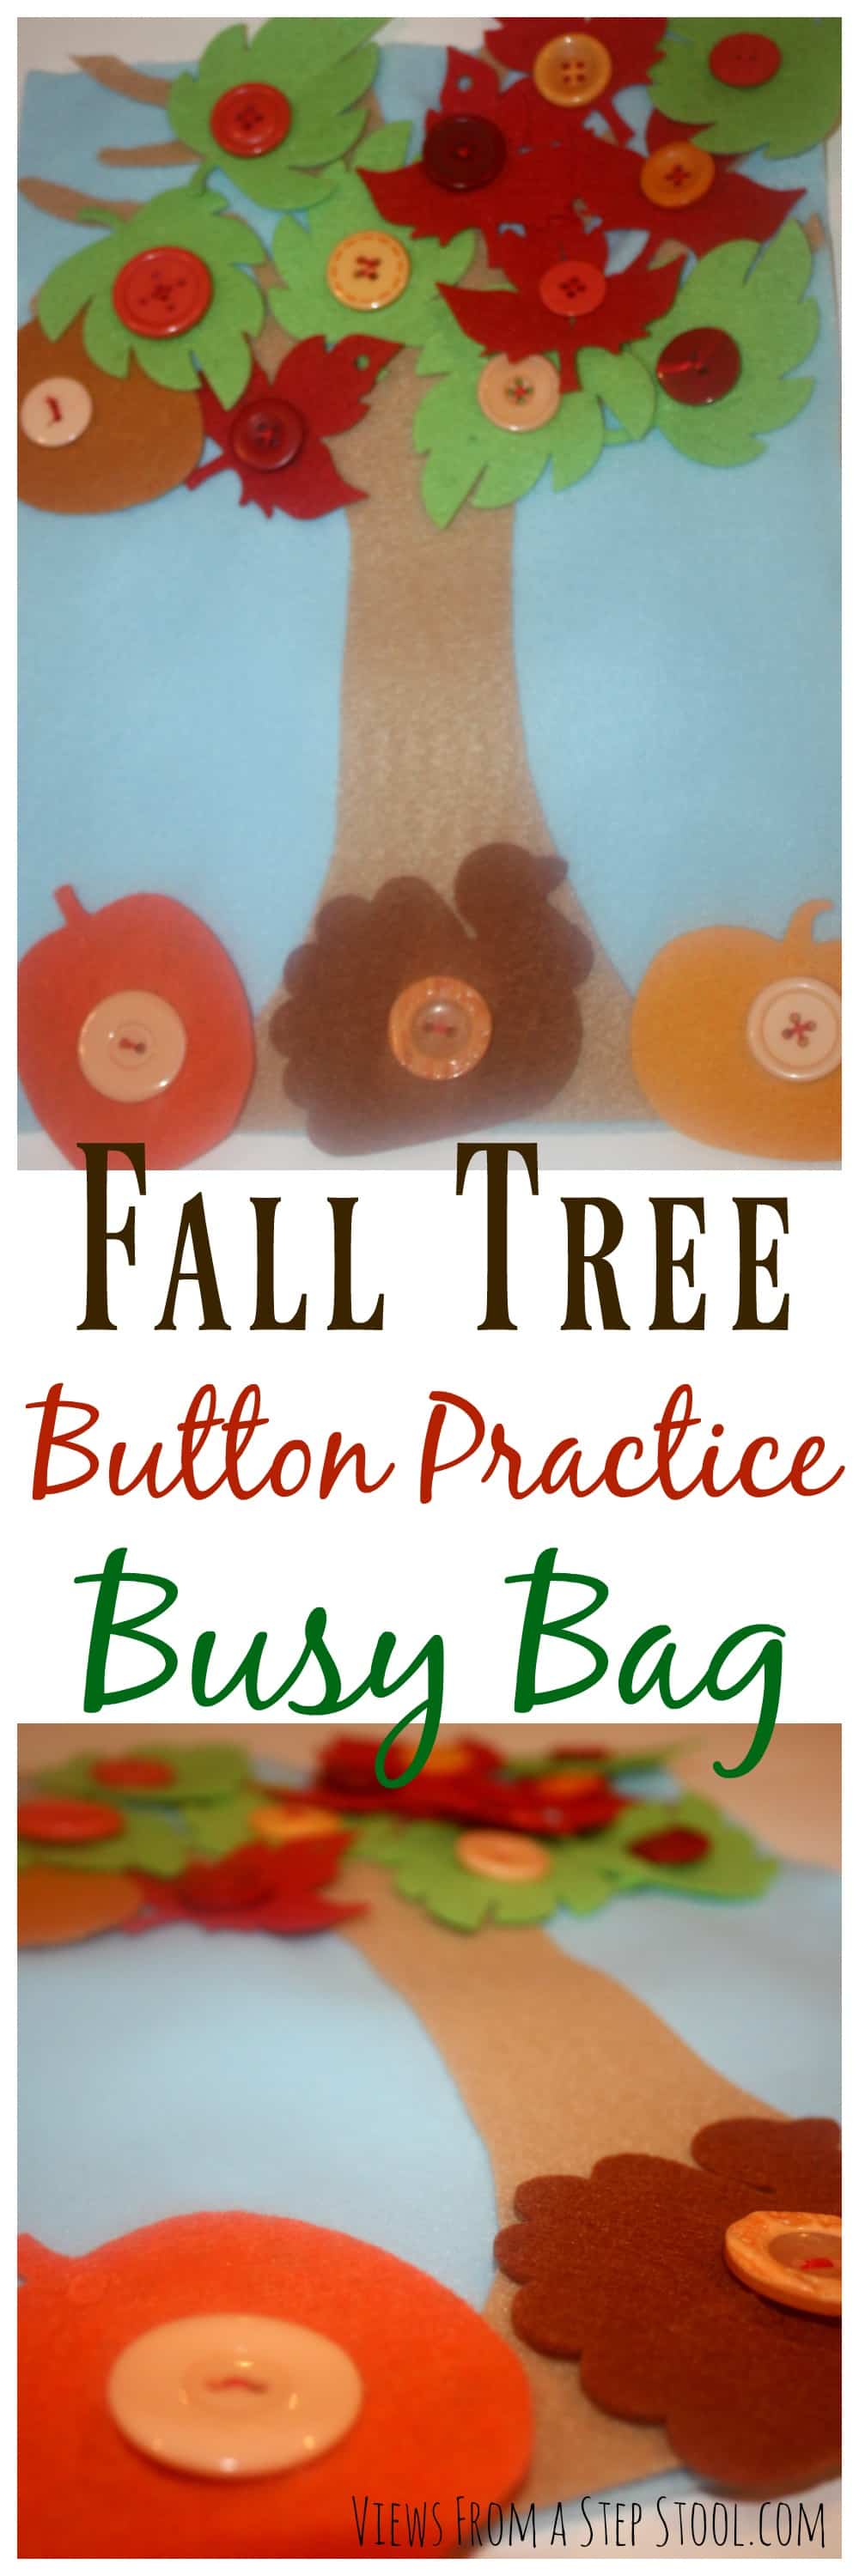 Fall Tree Button Practice Busy Bag